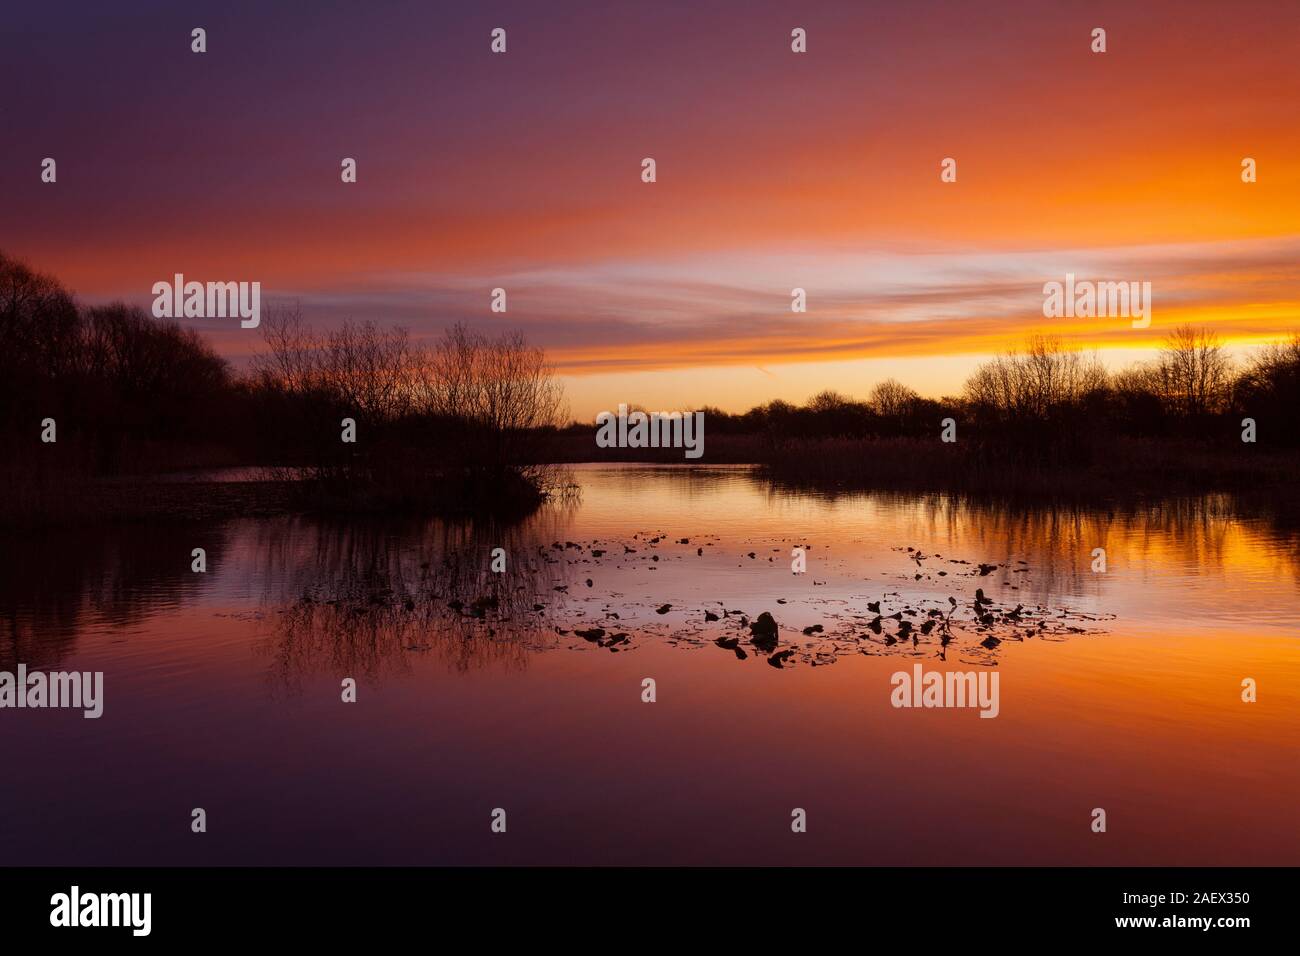 Barton-upon-Humber, North Lincolnshire, UK. 11th December 2019. UK Weather: Sunrise over a nature reserve on a Winter morning in December. Credit: LEE BEEL/Alamy Live News. Stock Photo